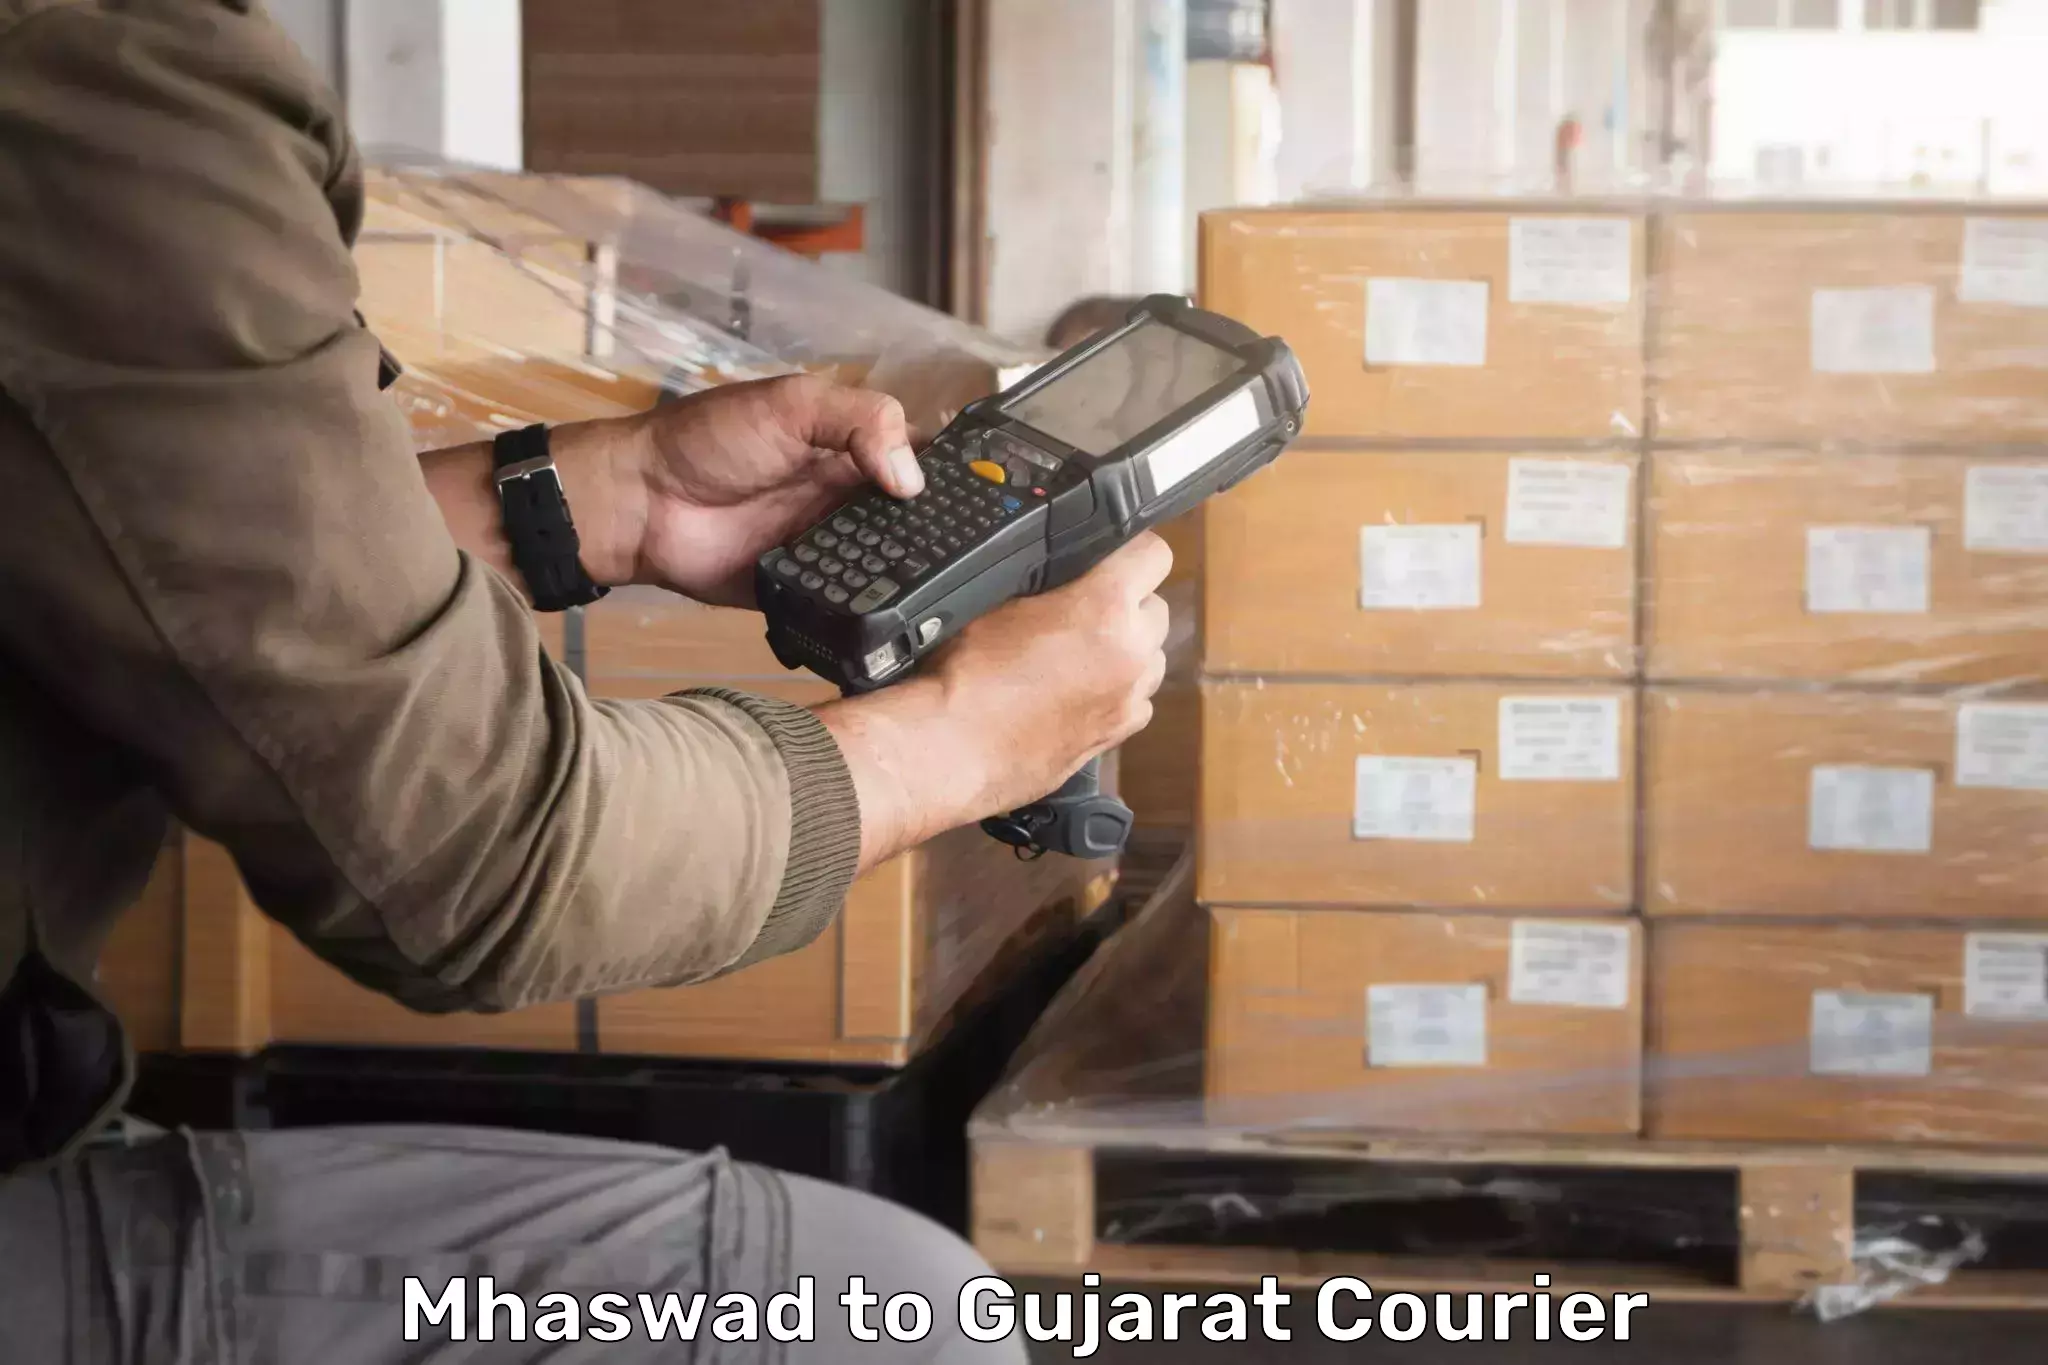 Efficient courier operations Mhaswad to Ahmedabad